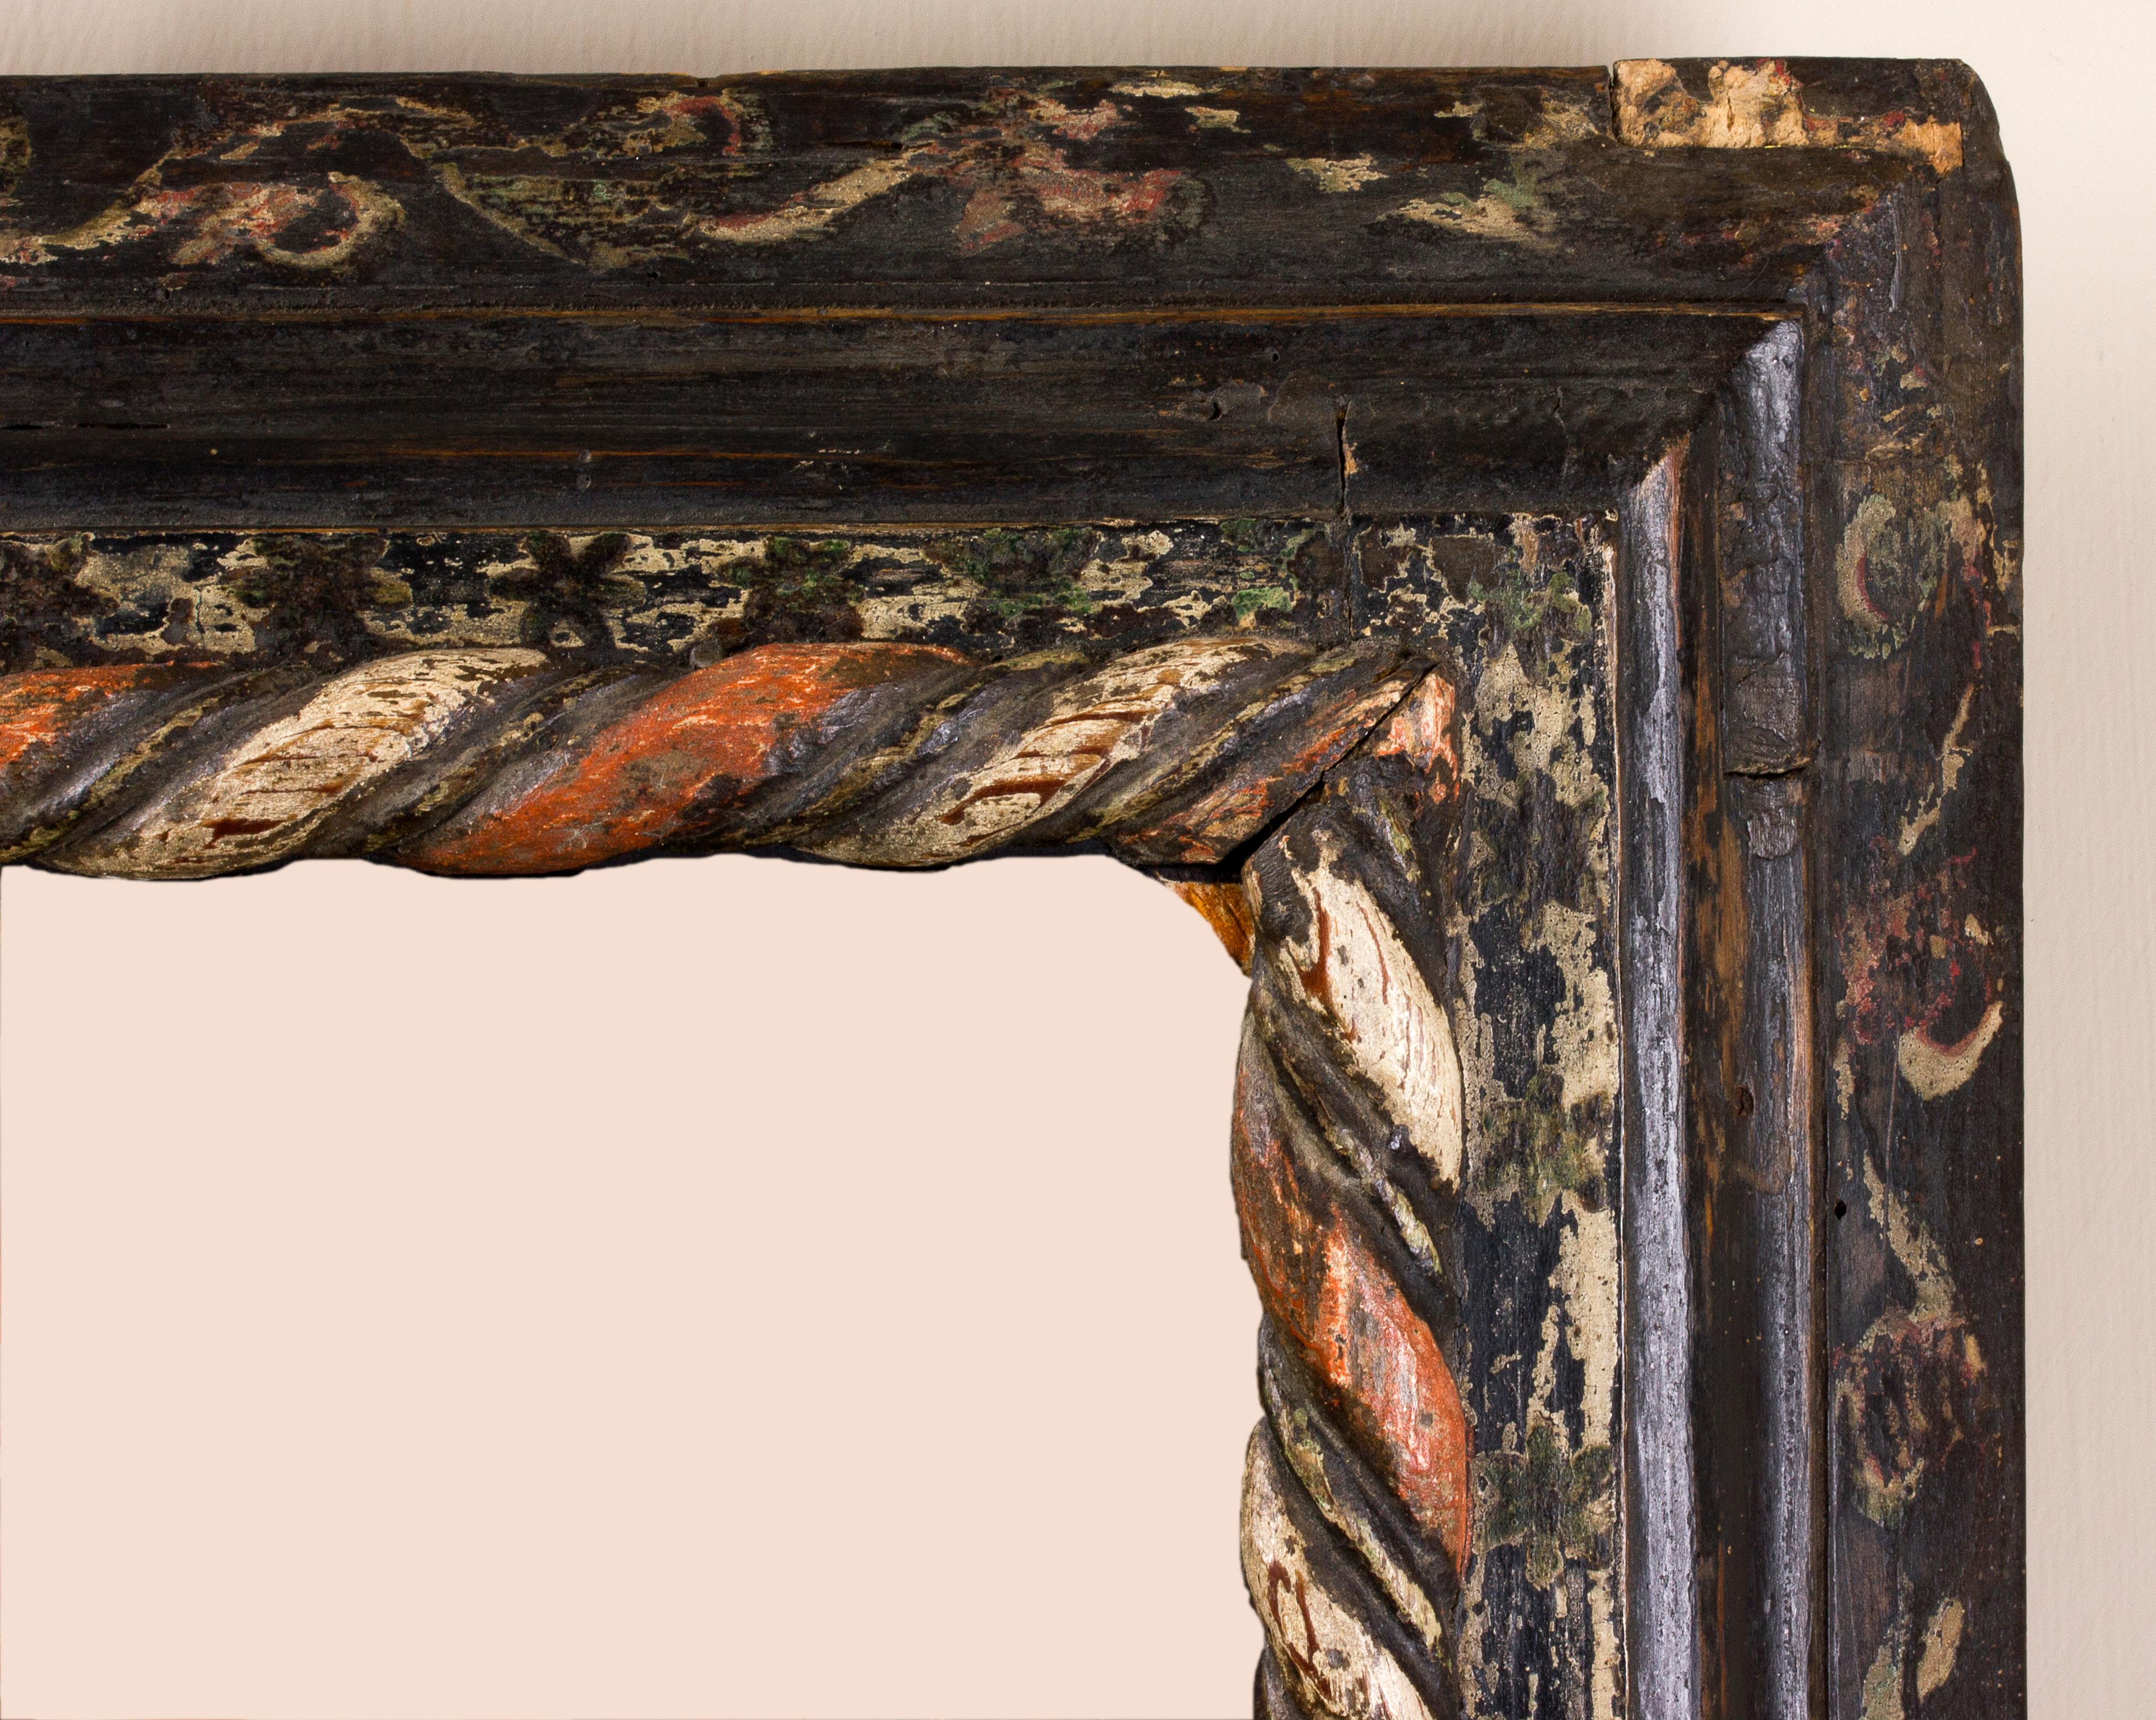 Central and northern Italy frame, 17th century
Mixtilinear profile with polychrome decoration of flowers, leaf patterns and twisted rope.
Inside: 32.7 x 40.8 cm; outside: 40 x 48.5 cm.
Depth is the wide of the band.
    